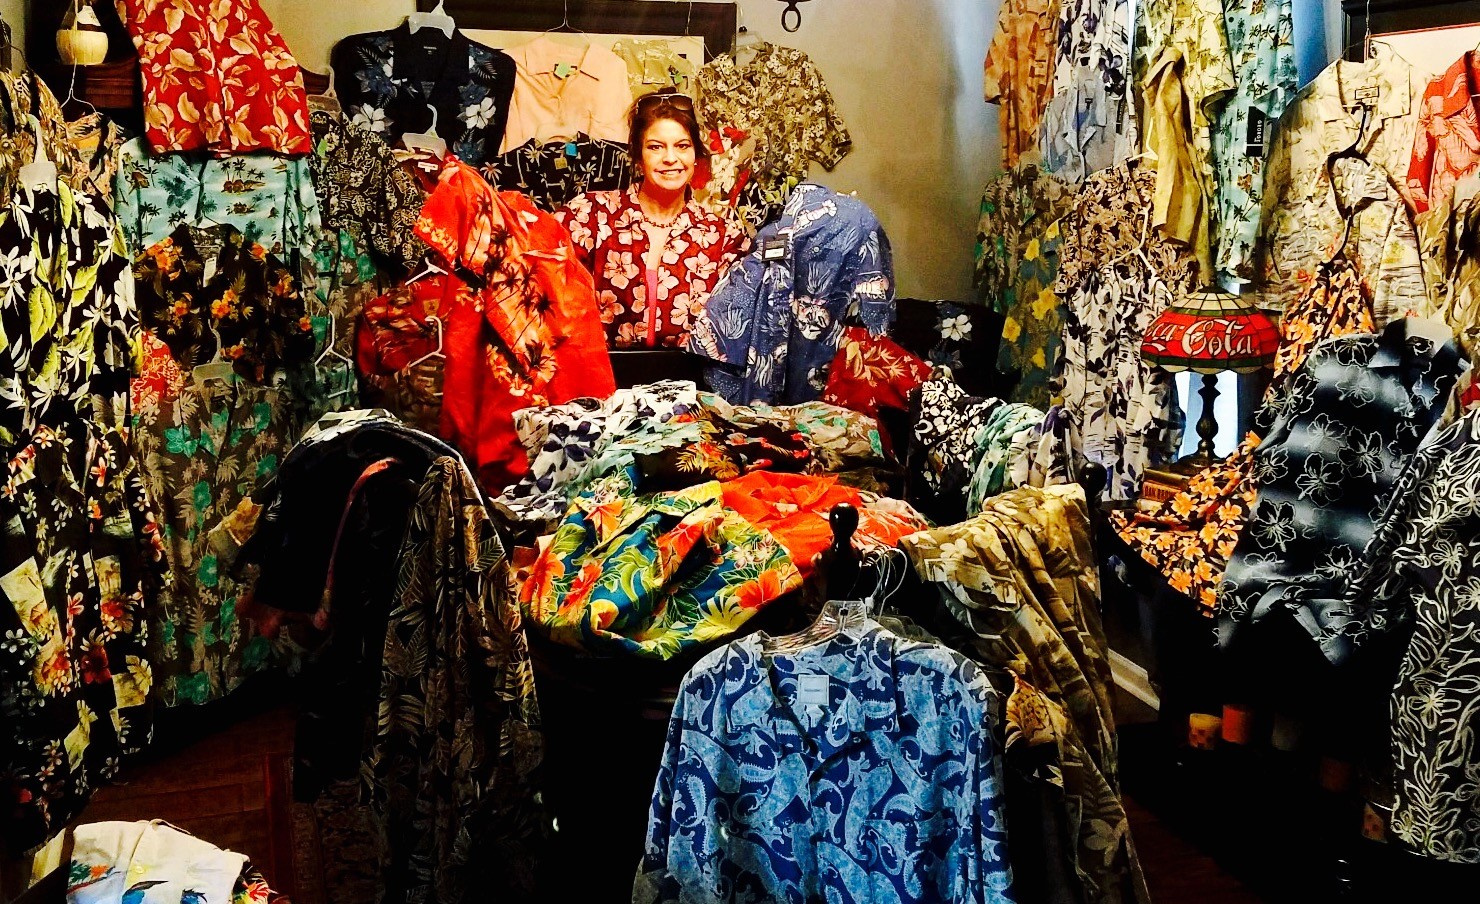 PHOTO: Mom collecting hundreds of Hawaiian shirts for her son, fellow soldiers overseas